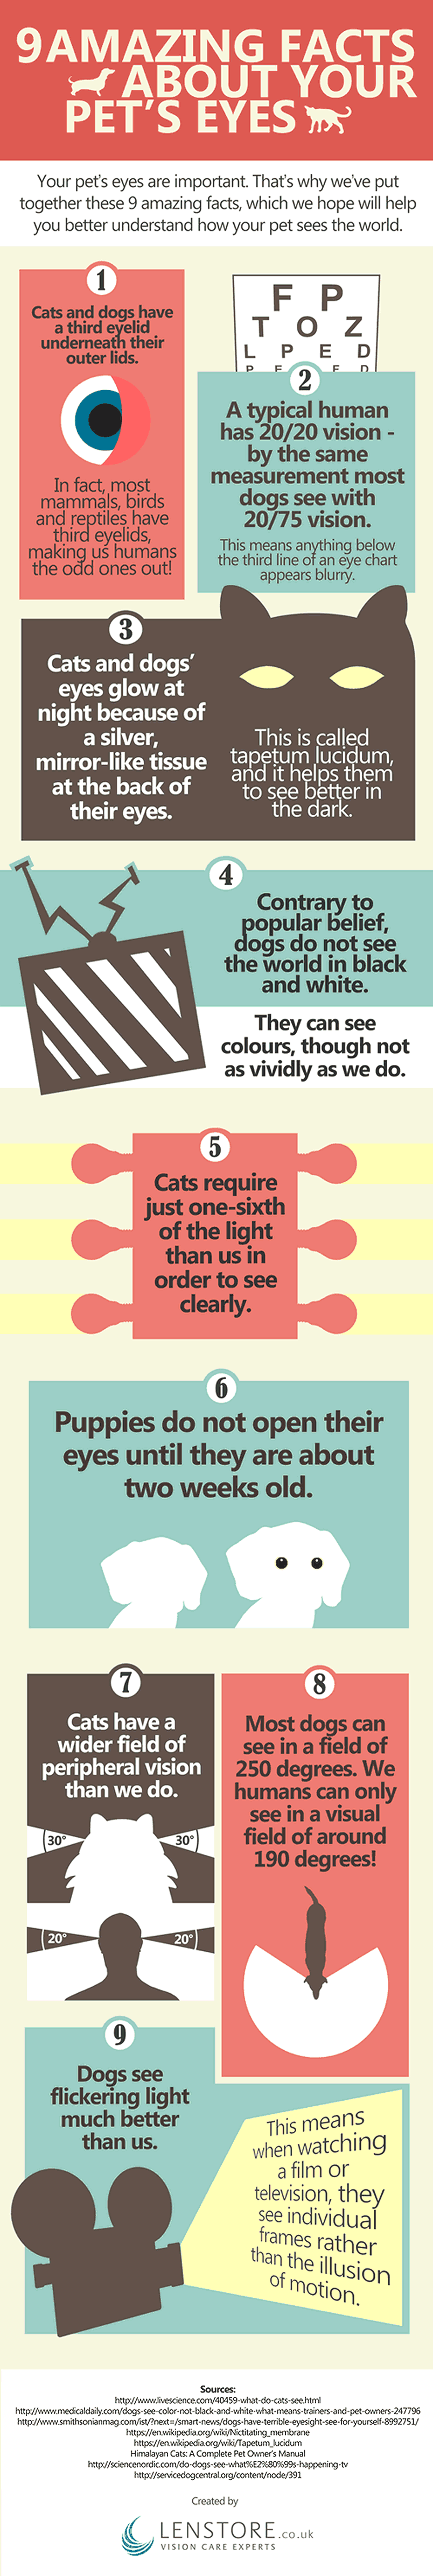 9 amazing facts about your pet's eyes infographic